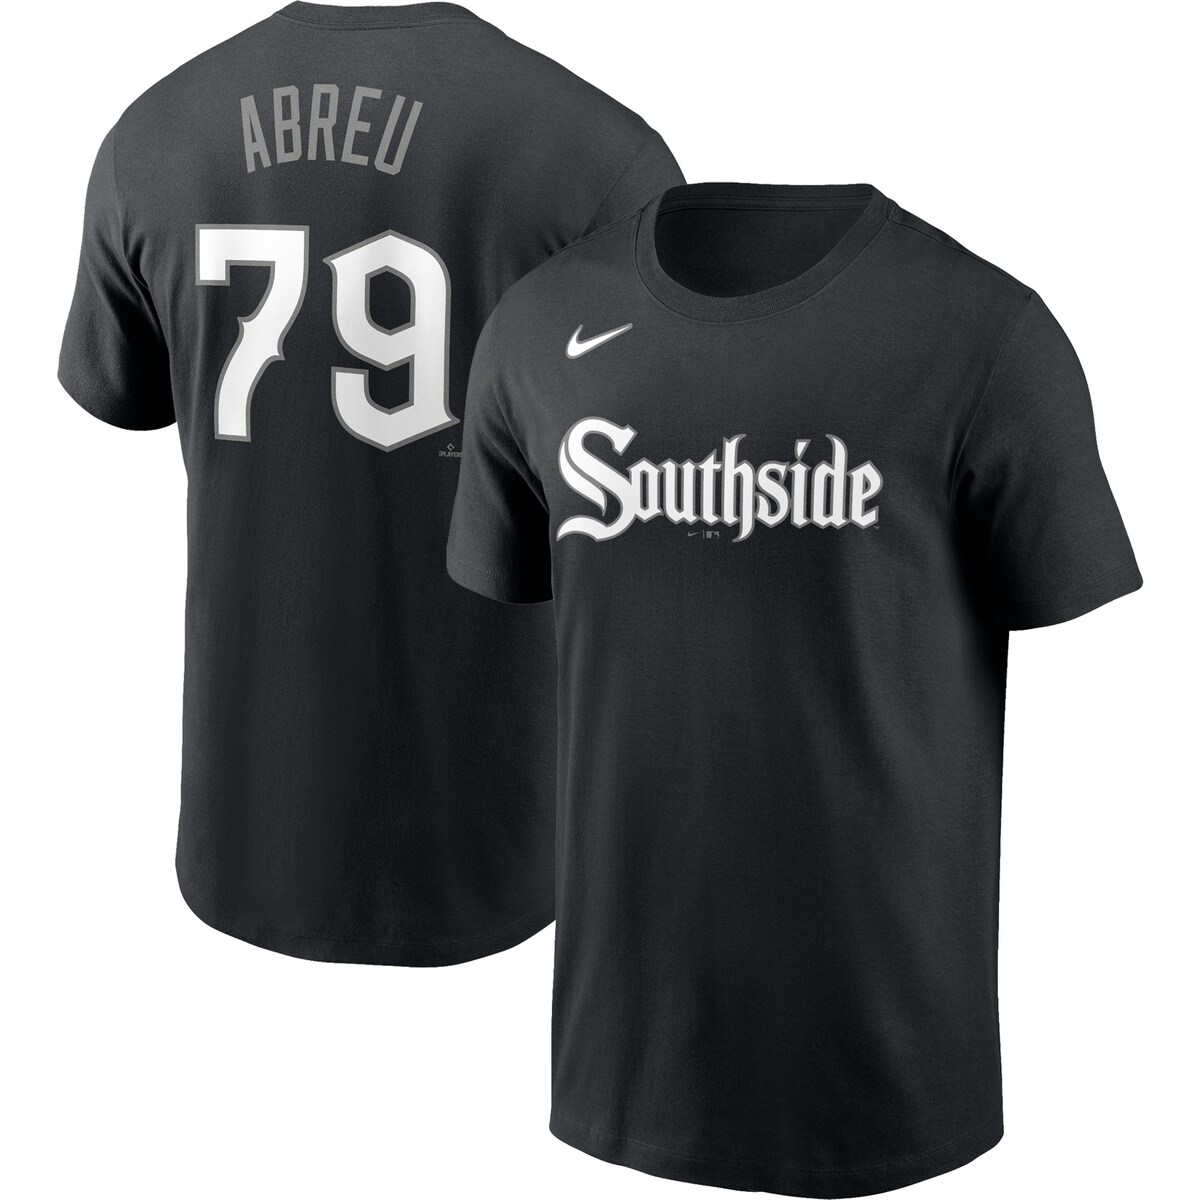 MLB zCg\bNX zZEAuE TVc Nike iCL Y ubN (Men's Nike City Connect Name & Number T-Shirt)